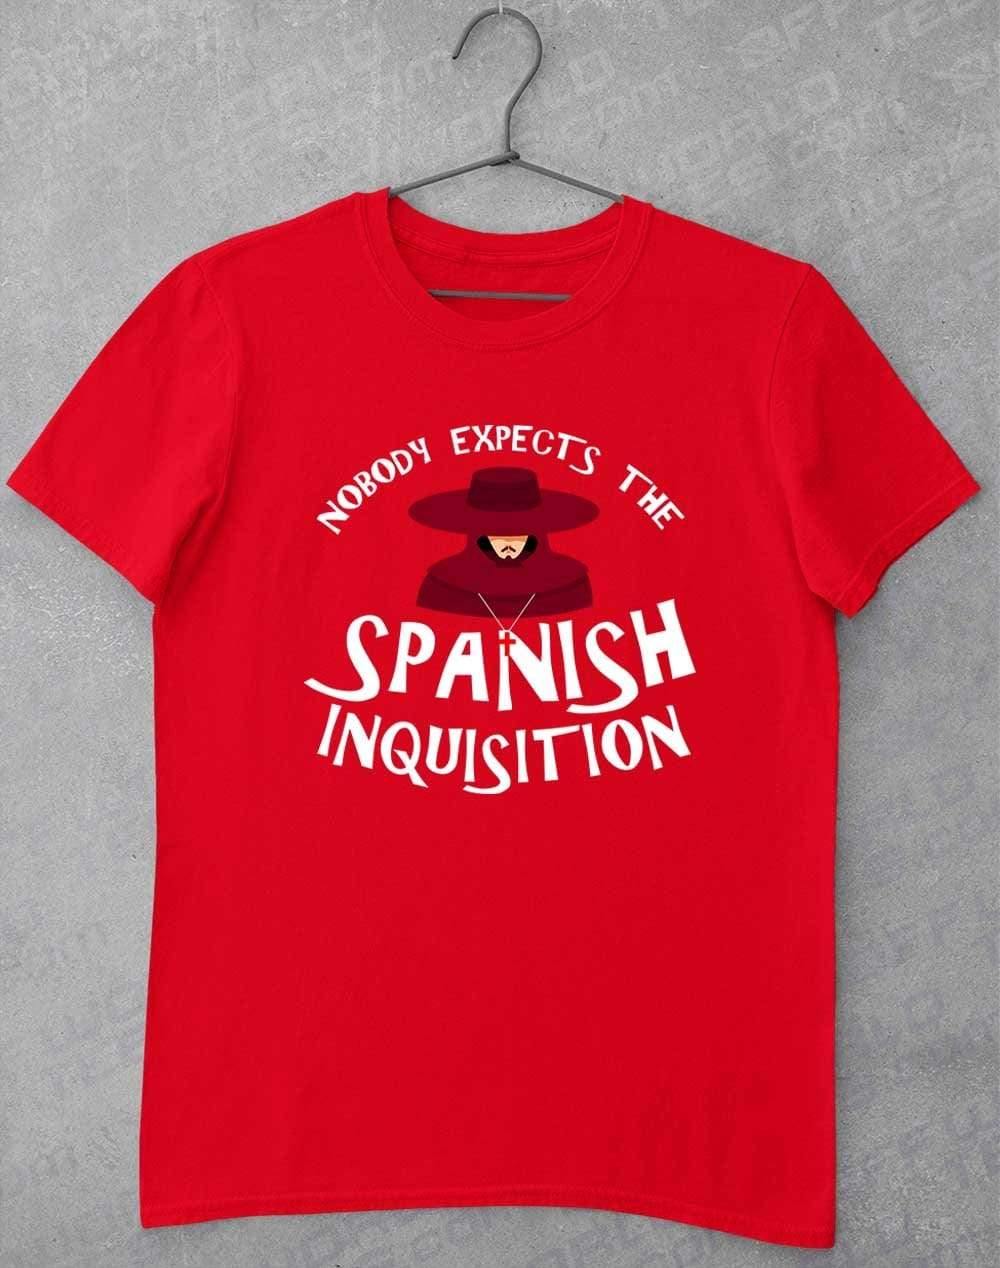 Nobody Expects the Spanish Inquisition T-Shirt S / Red  - Off World Tees